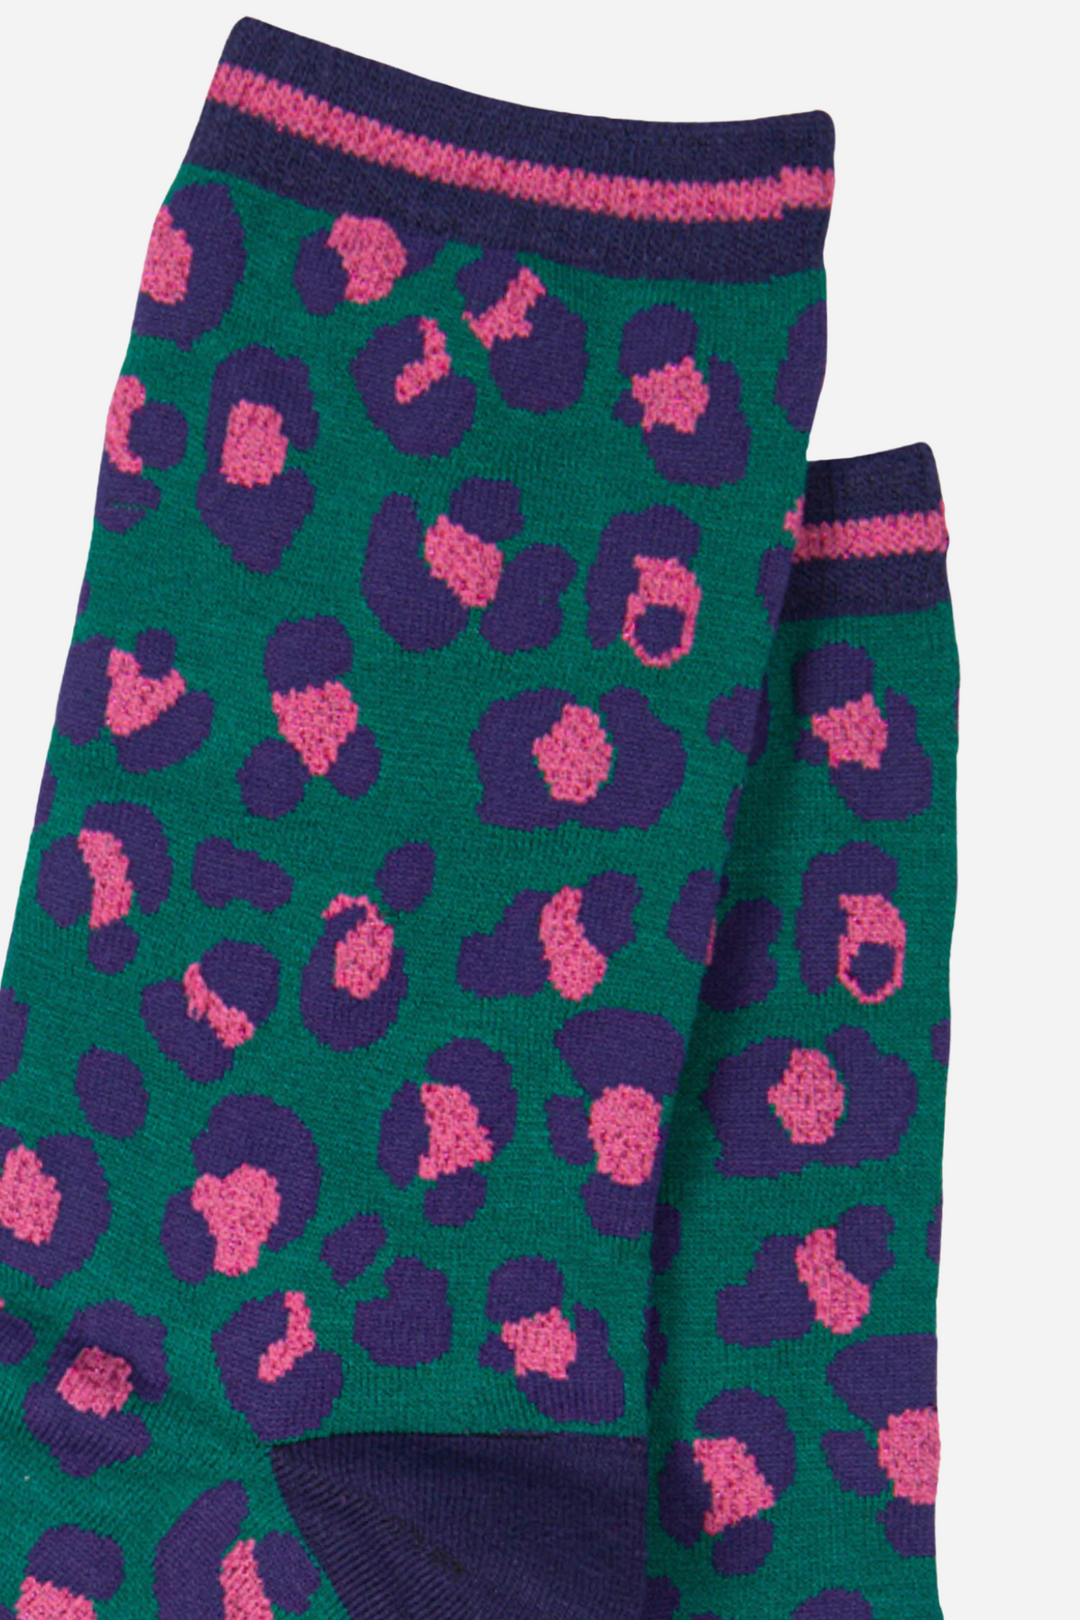 close up of the pink and green leopard print pattern